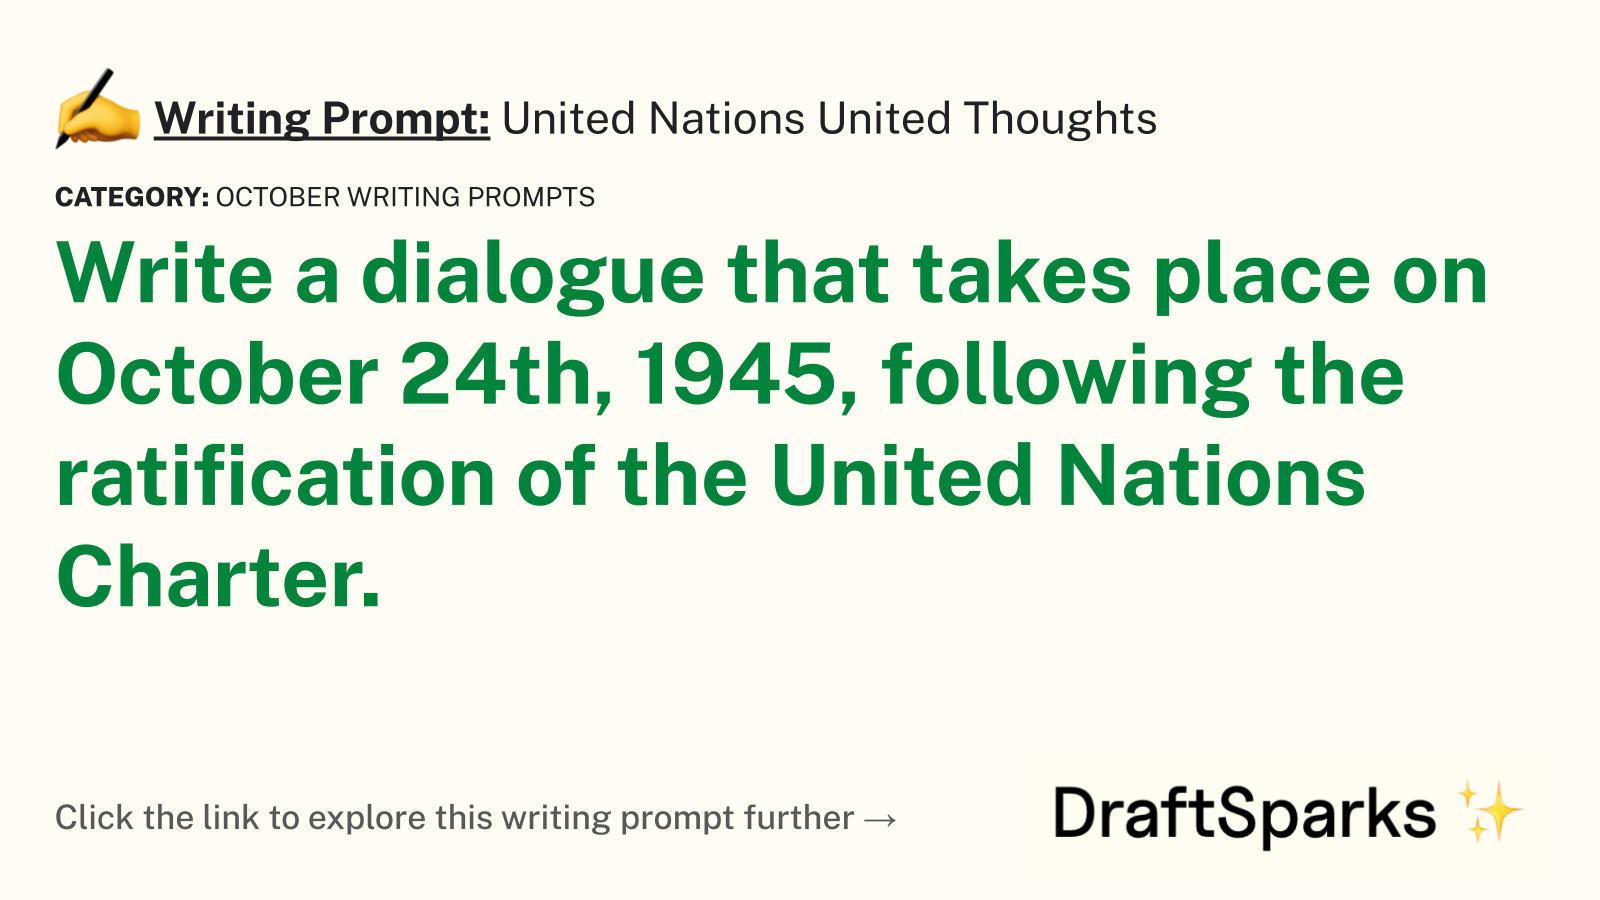 United Nations United Thoughts